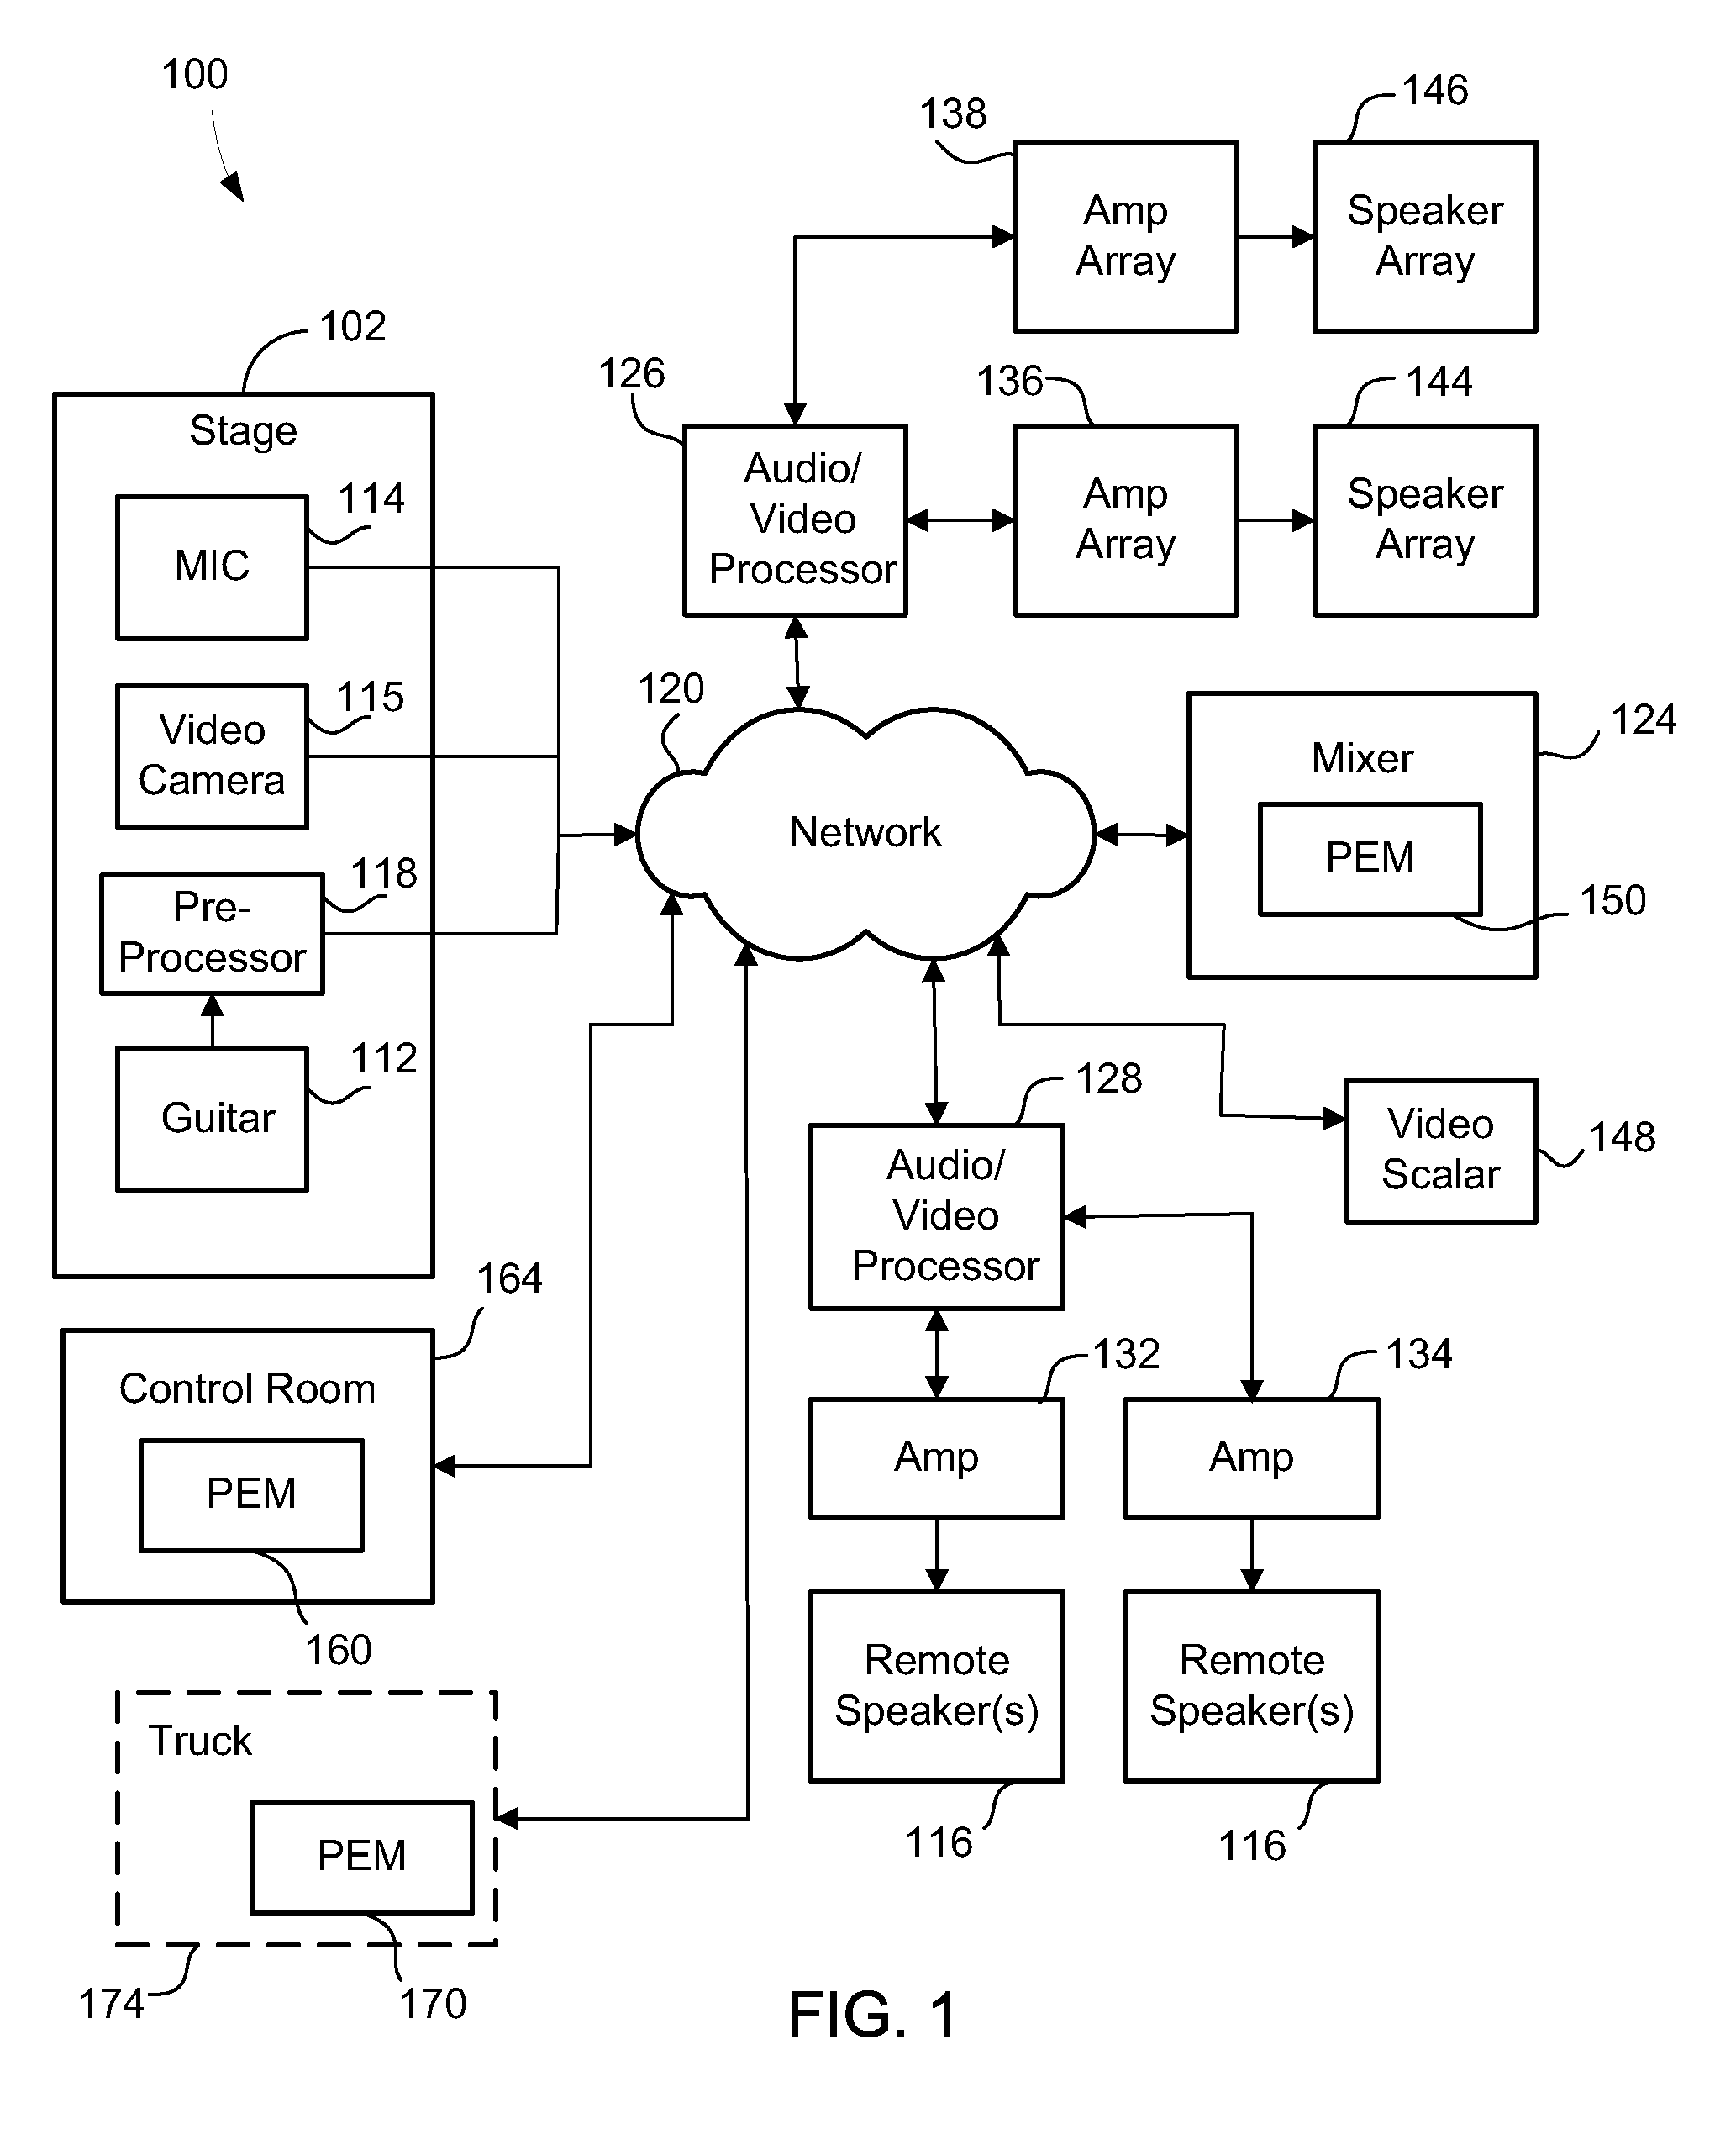 System for networked routing of audio in a live sound system